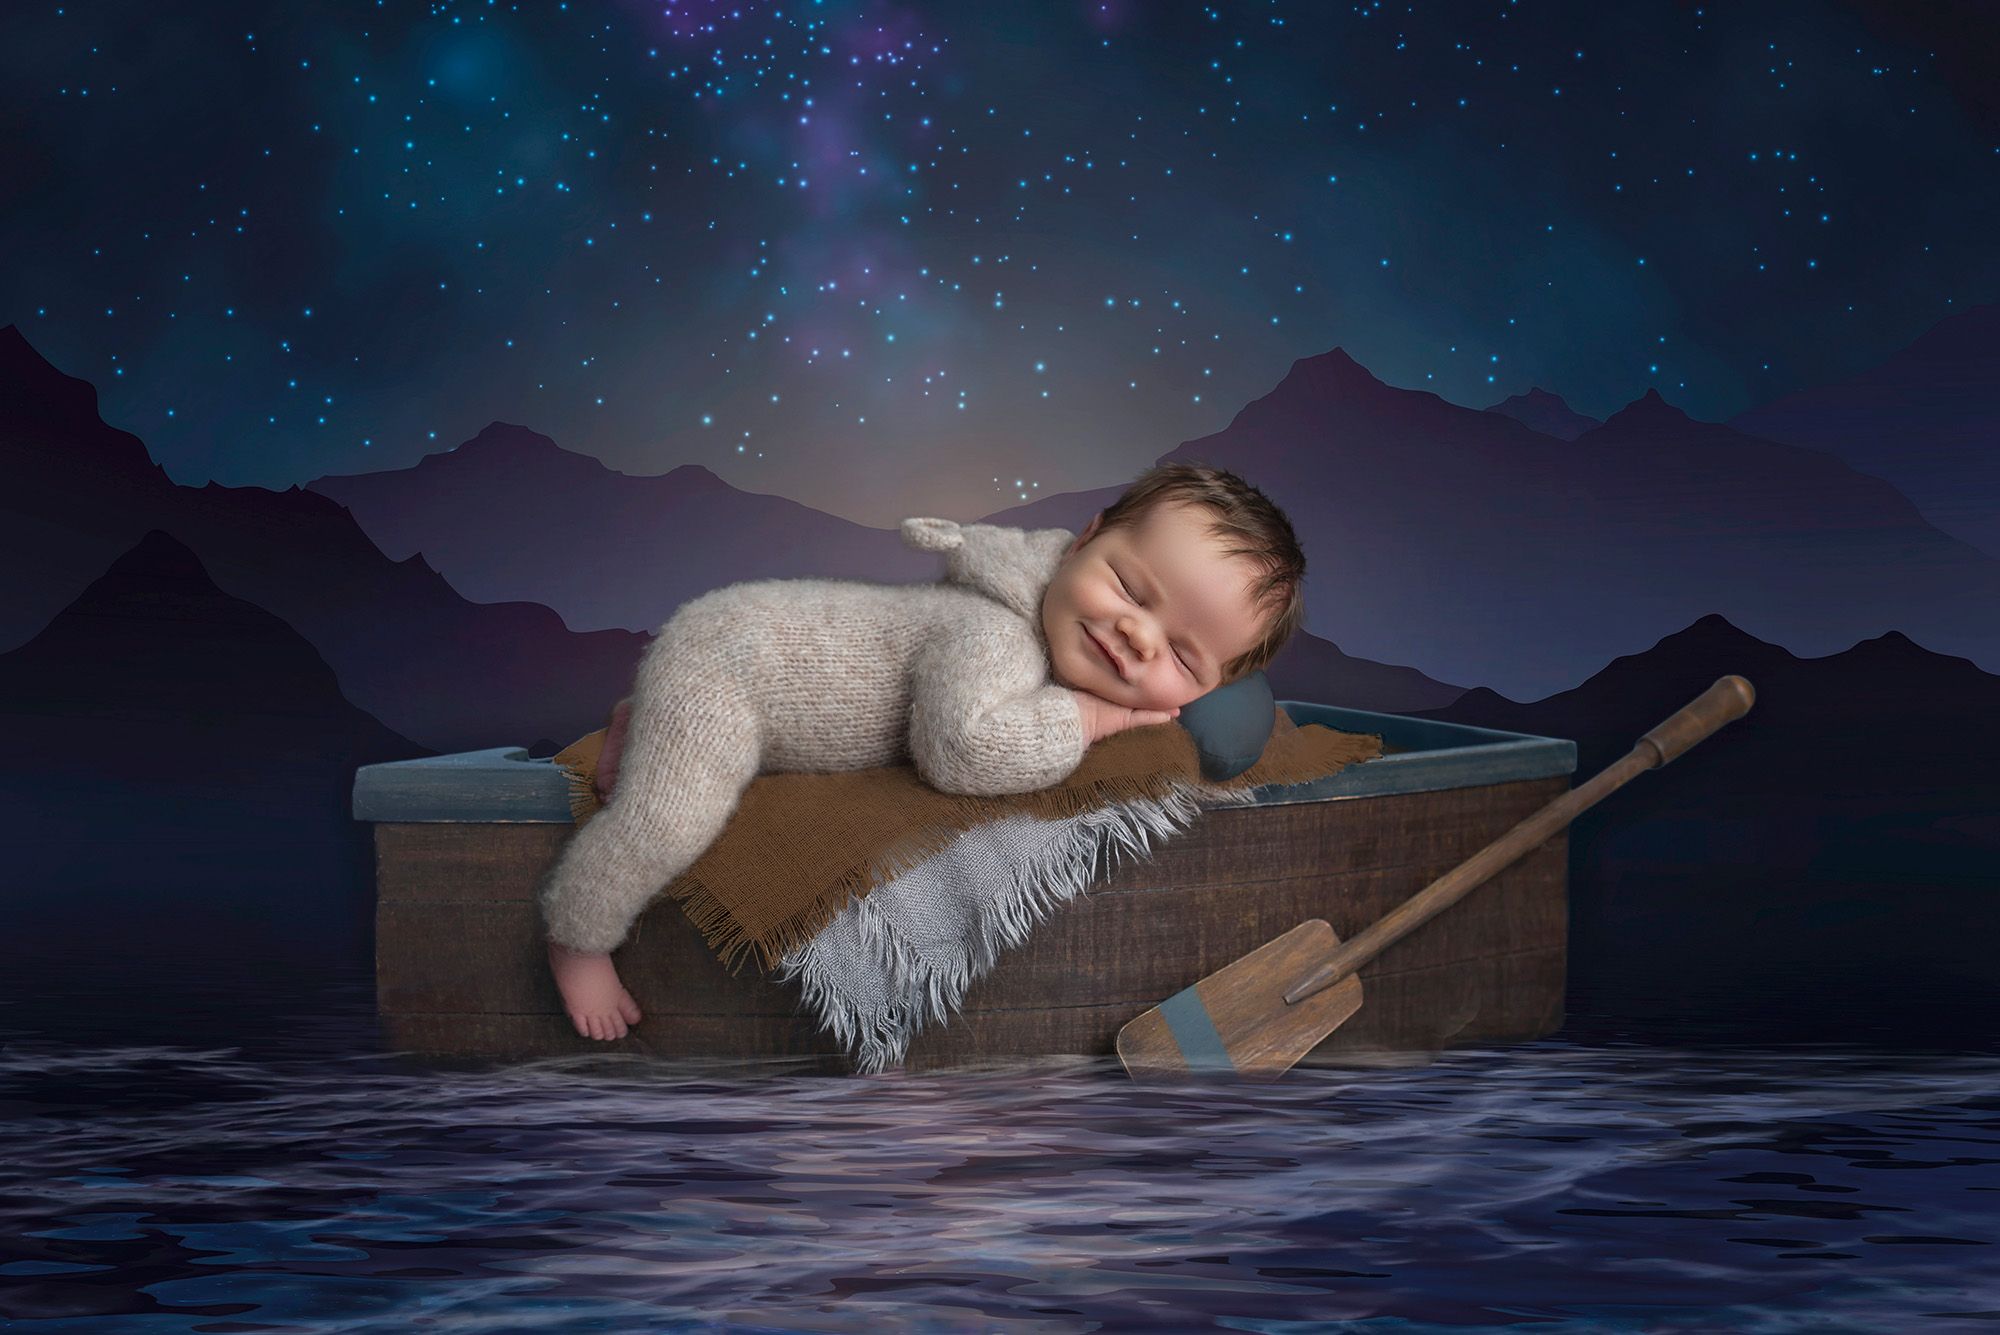 Connecticut Newborn Photography newborn baby boy asleep on row boat in sweater romper with a mountain moonlit background